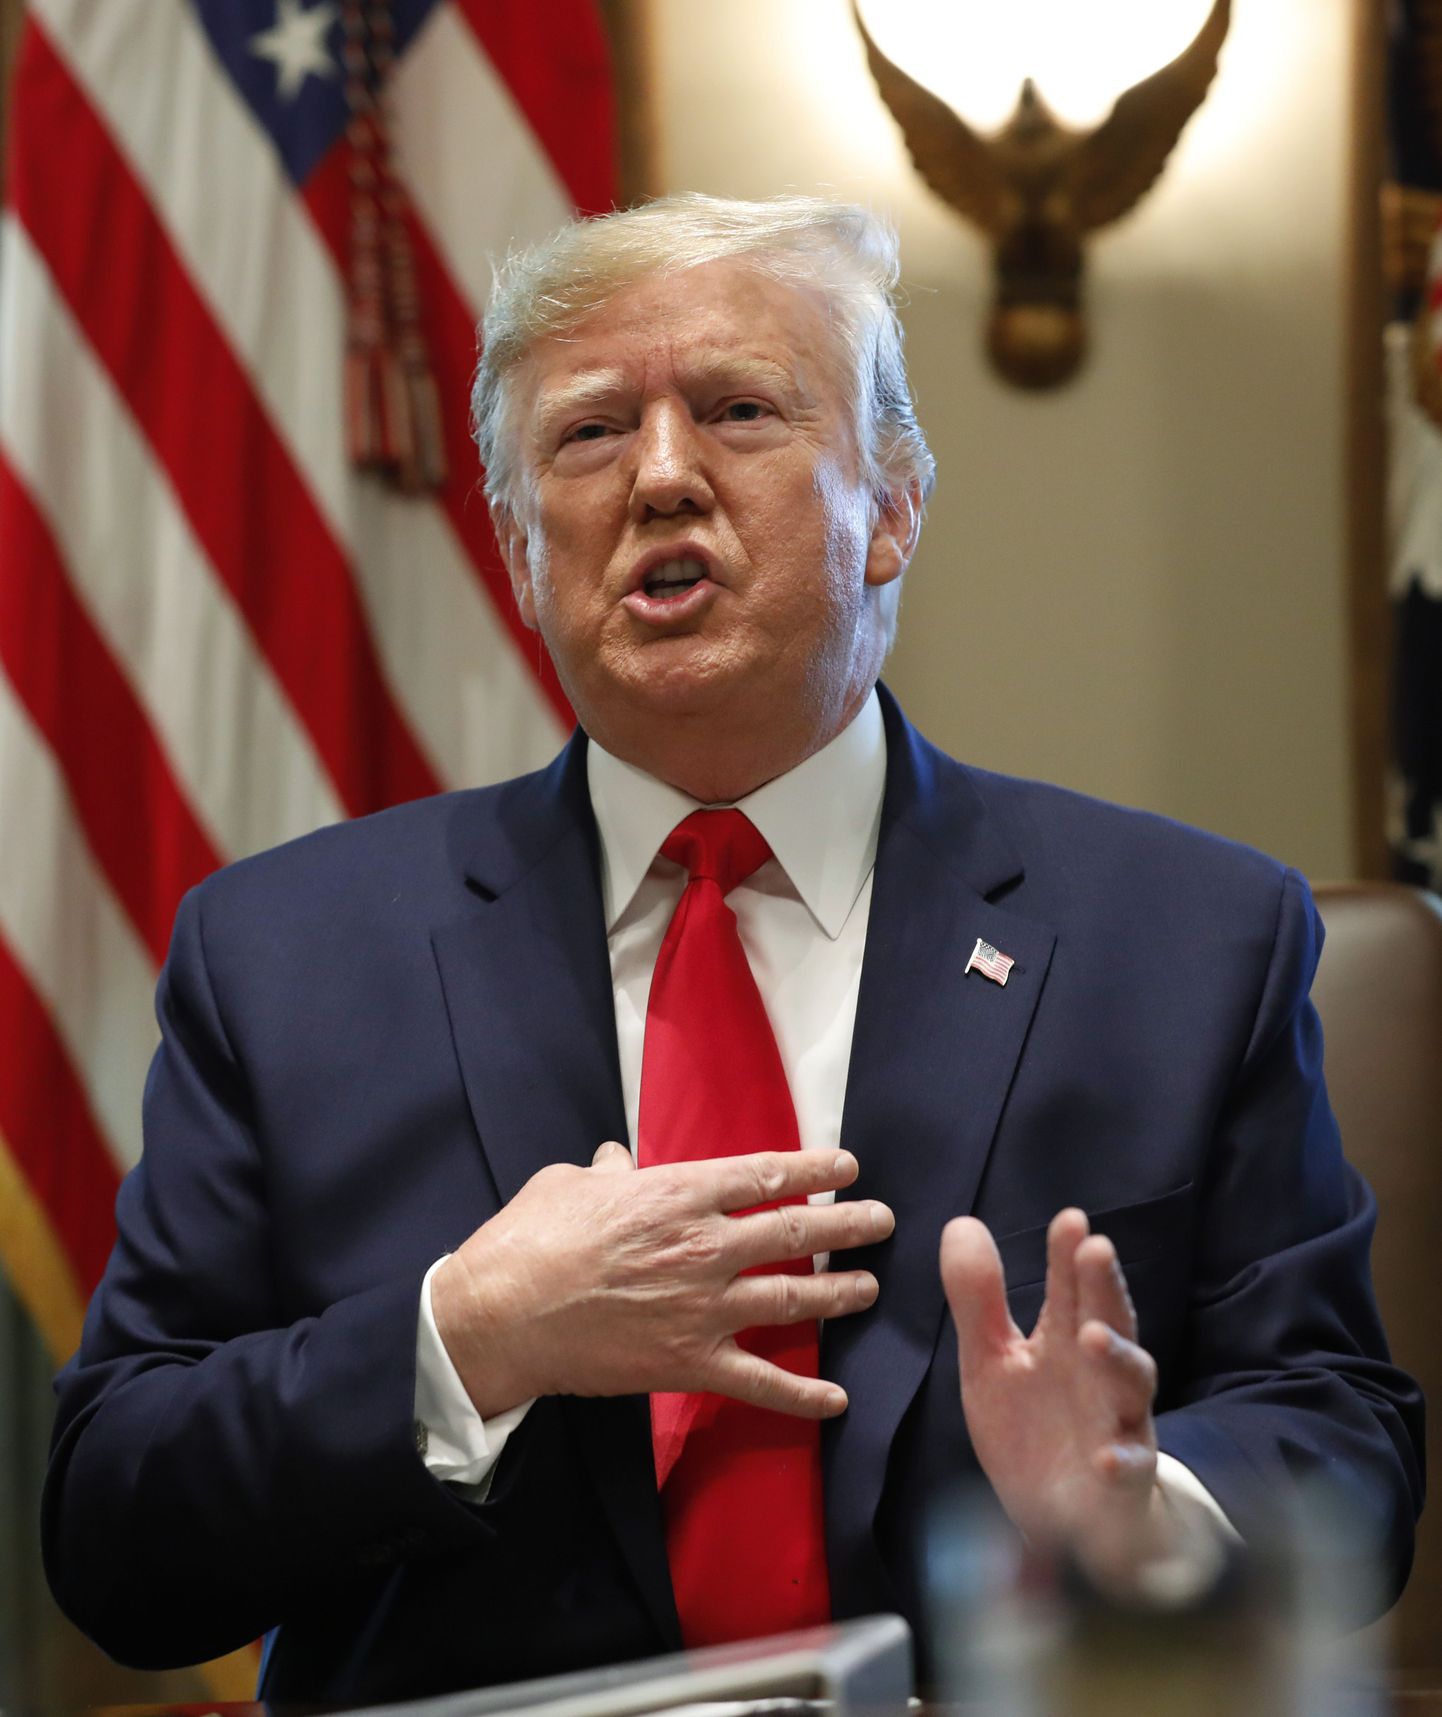 United States President Donald J. Trump speaks during a Cabinet Meeting at the White House in Washington, DC on October 21, 2019. Photo Credit: Yuri Gripas/CNP/AdMedia//Z-ADMEDIA_adm_102119_Trump-Cabinet_CNP_042/1910220141/Credit:Yuri Gripas/CNP/AdMedia/SIPA/1910220142